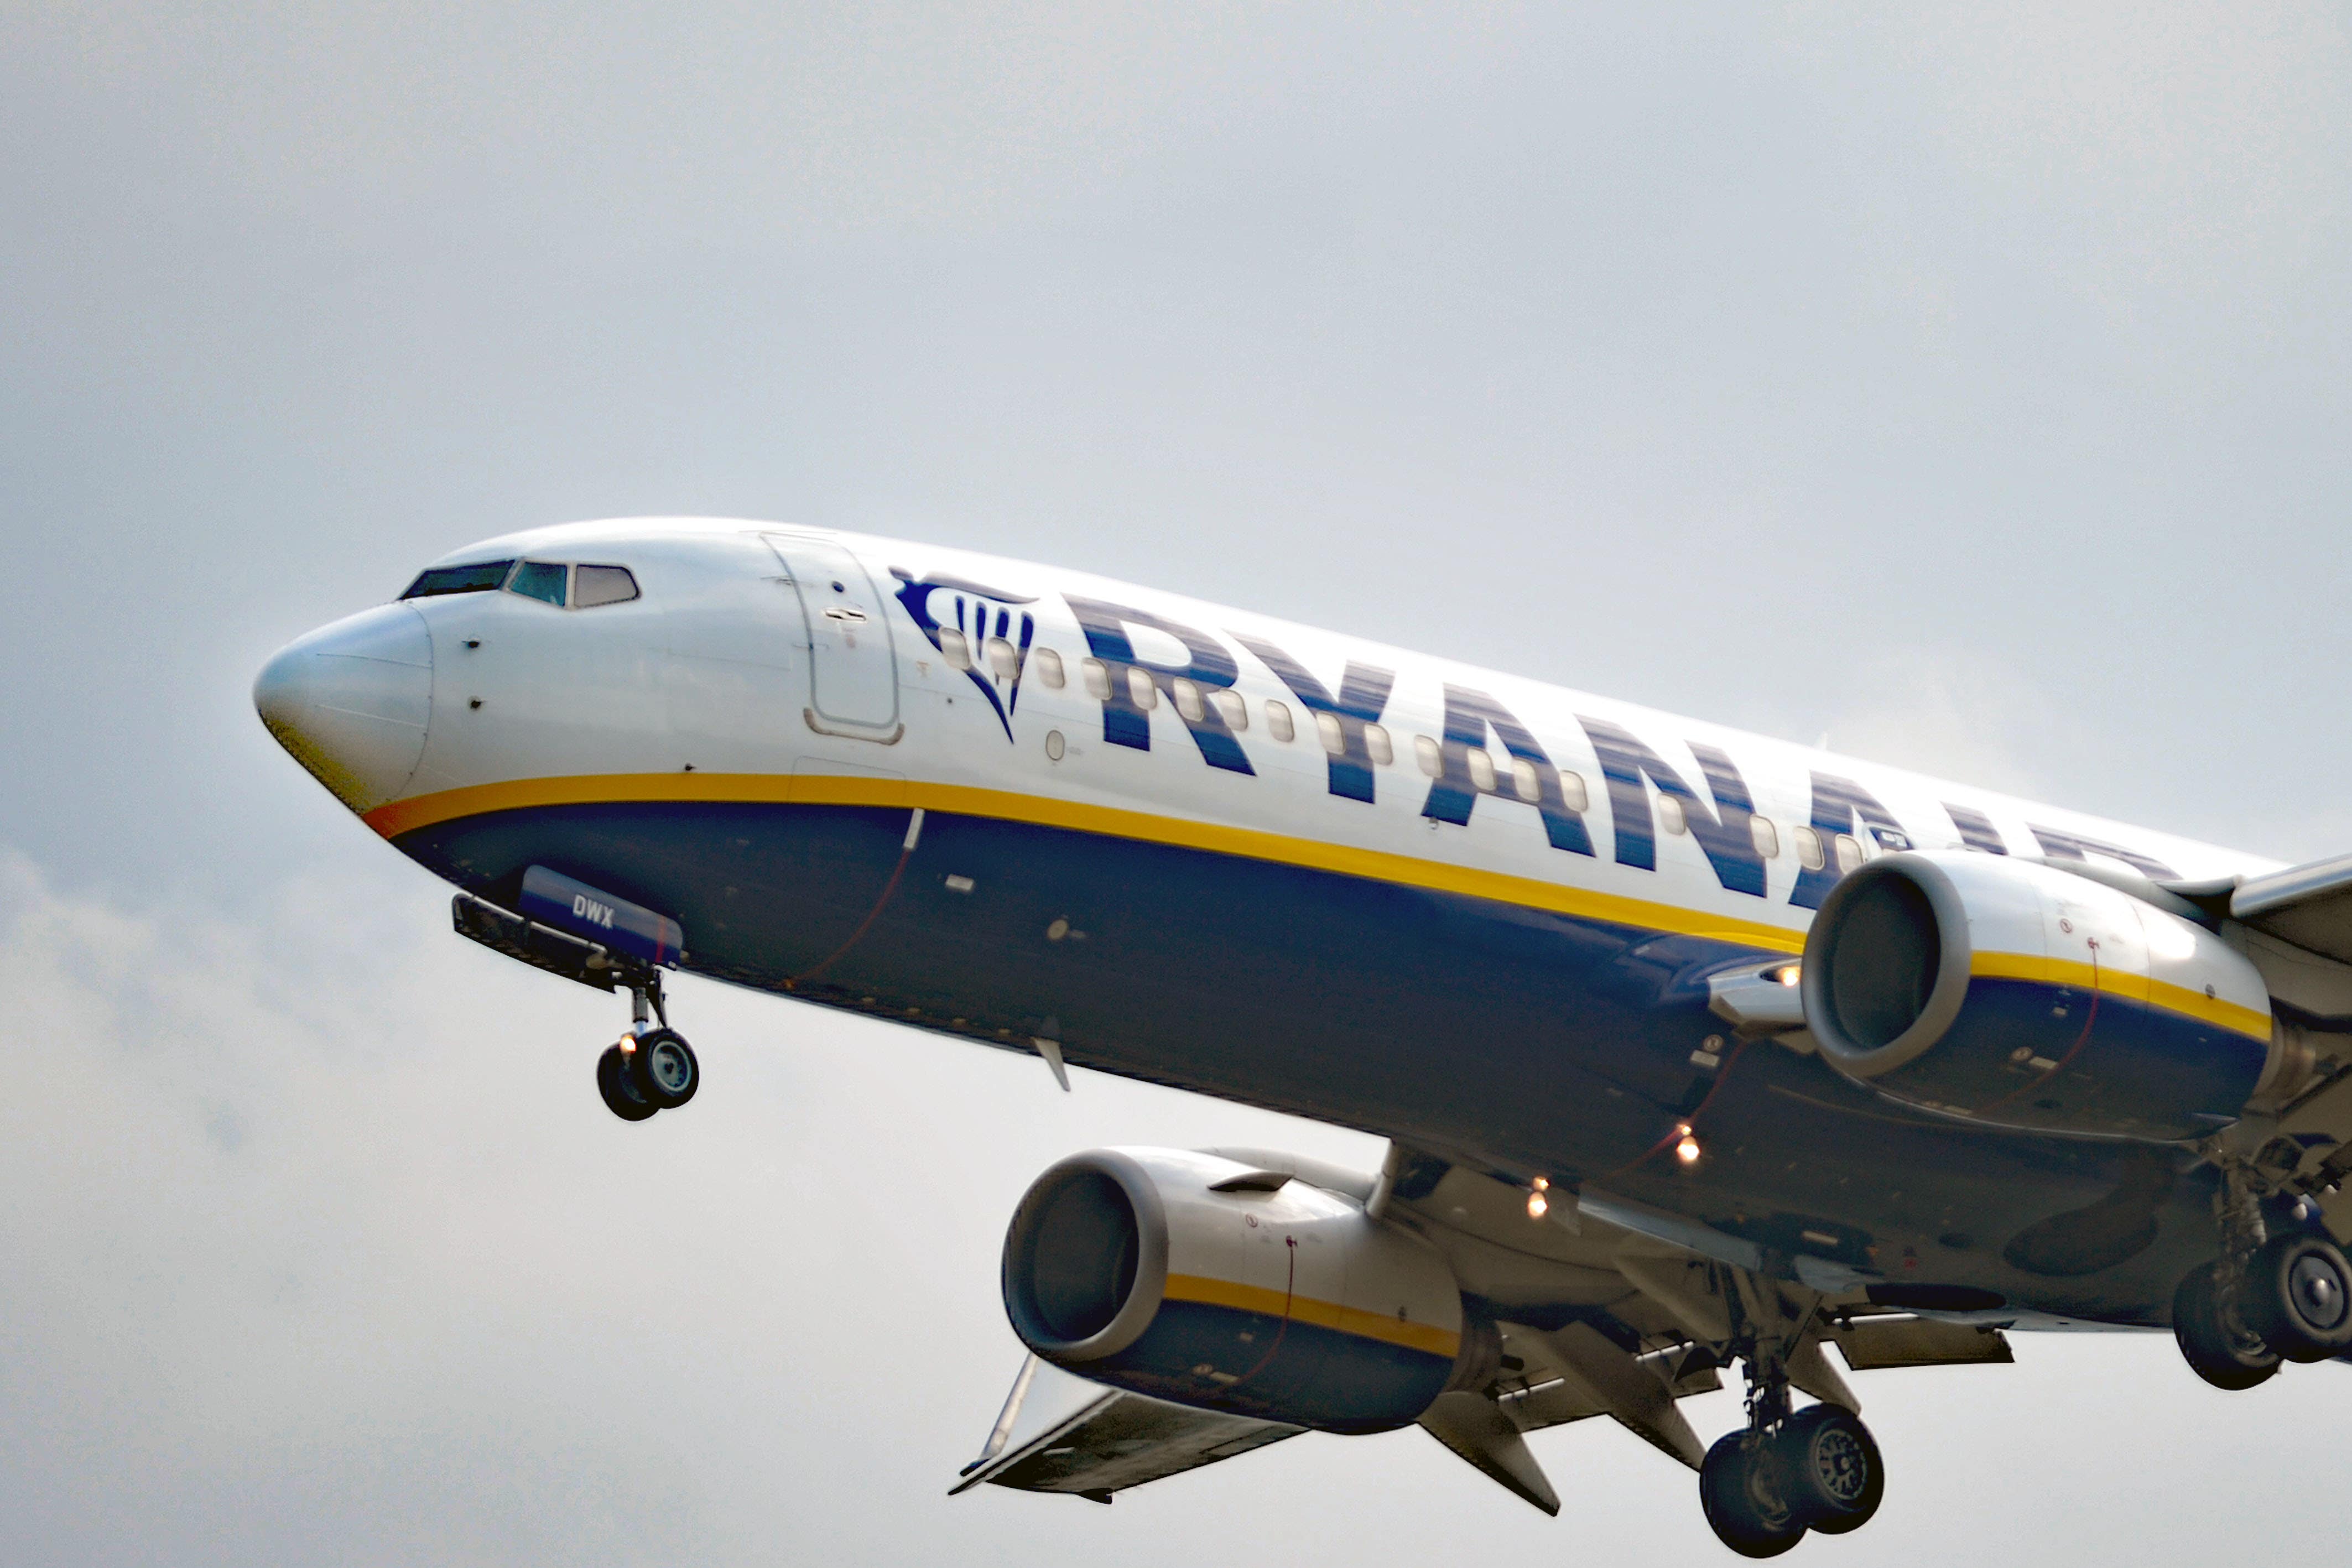 Ryanair has reported a hike in fares and profits amid strong demand for travel